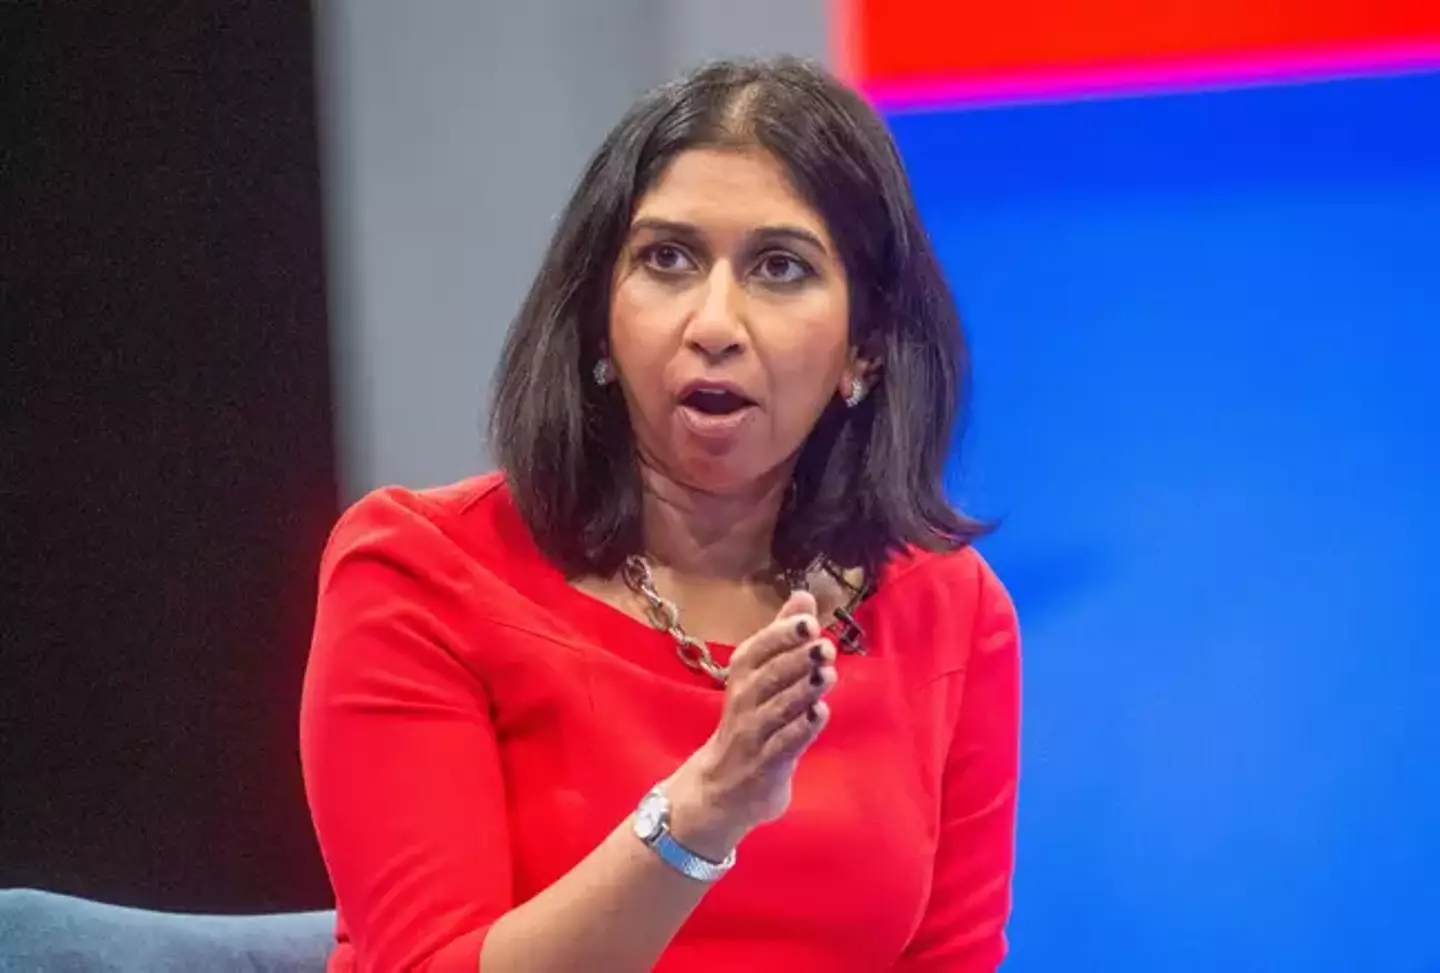 UK home secretary Suella Braverman has suggested she wants to take a tougher line on drugs.